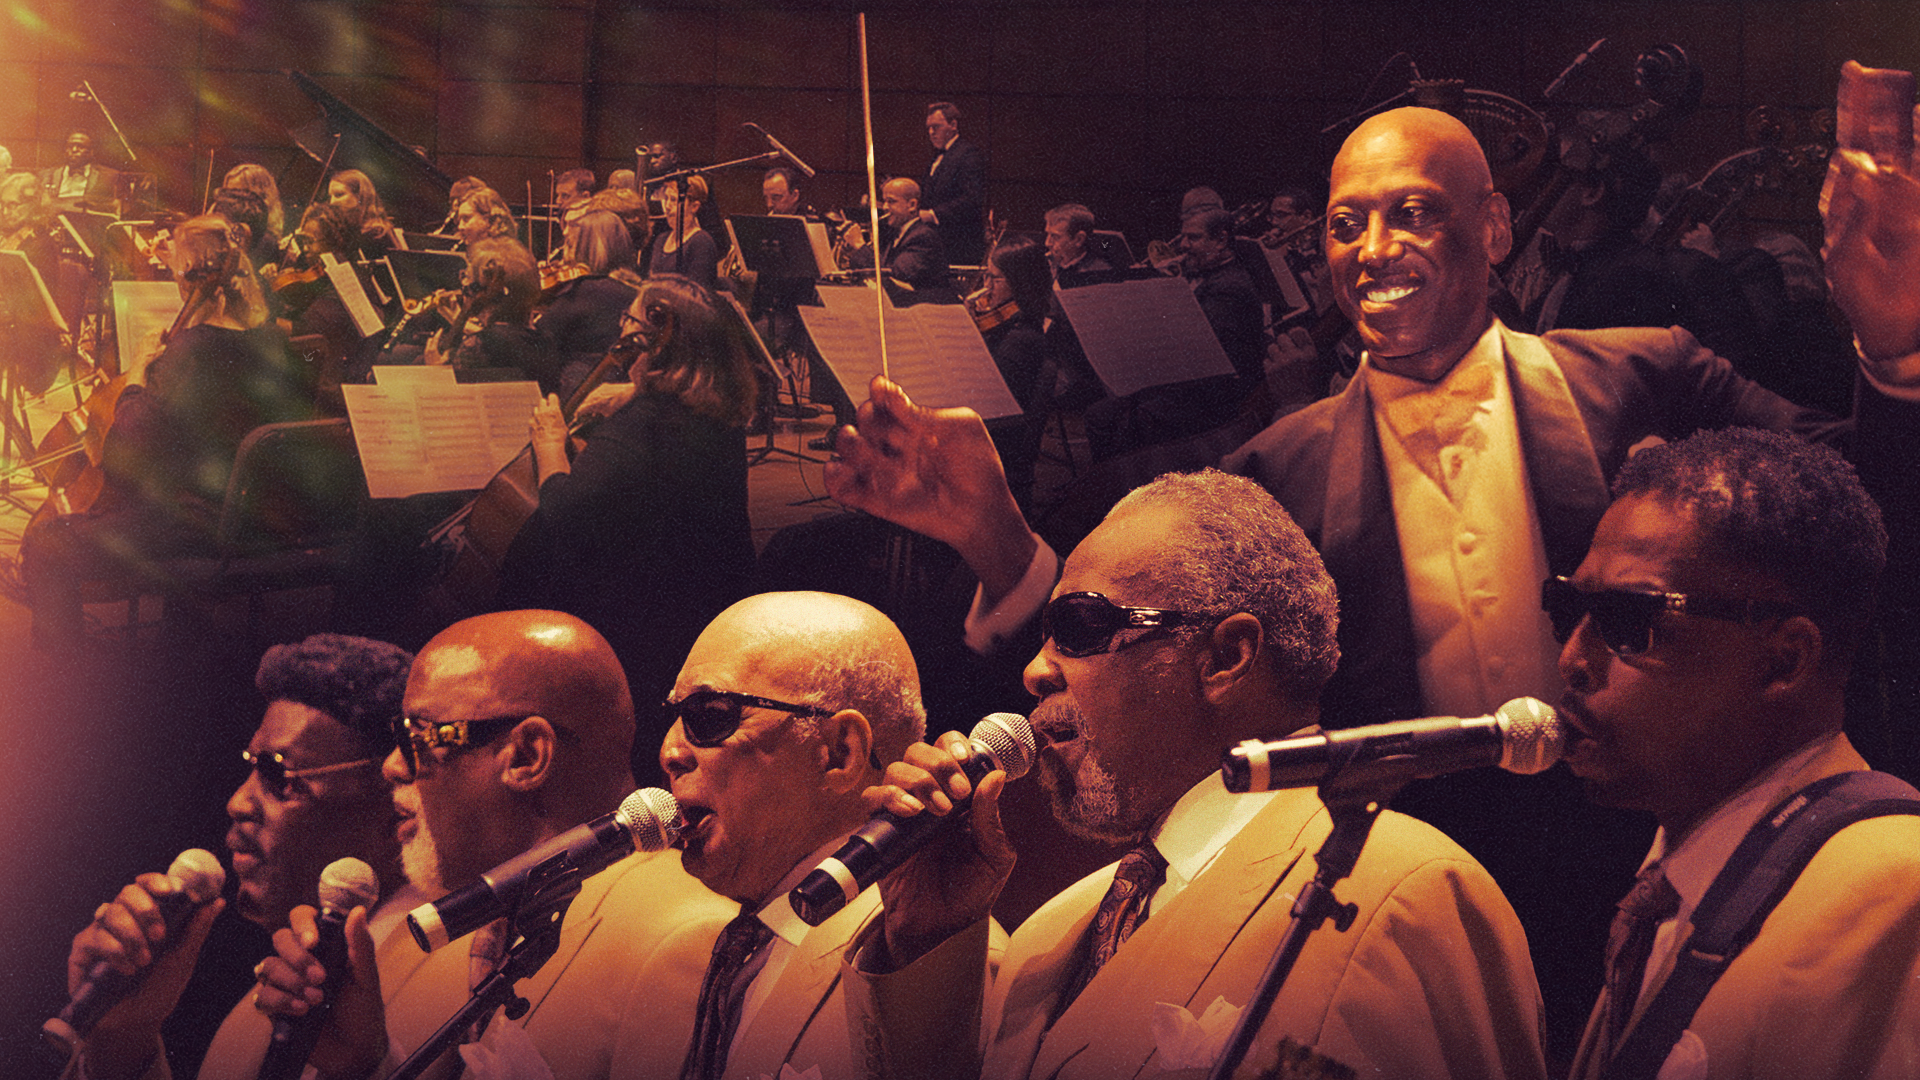 Check out A Symphony Celebration: The Blind Boys of Alabama with Dr. Henry Panion III airing on a public television station near you!